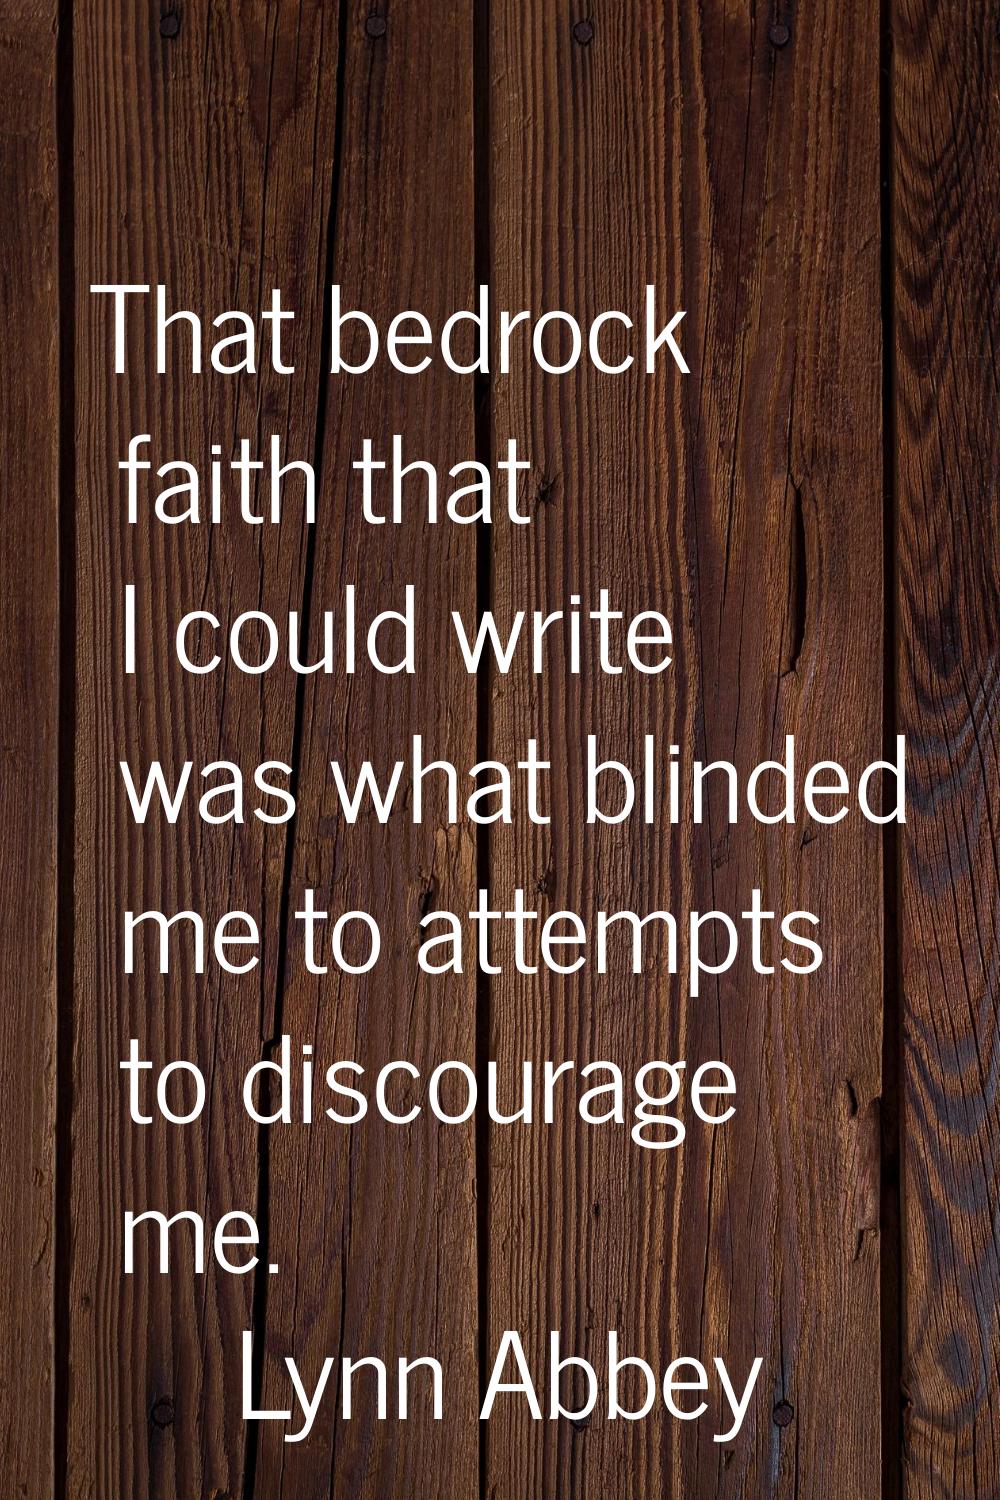 That bedrock faith that I could write was what blinded me to attempts to discourage me.